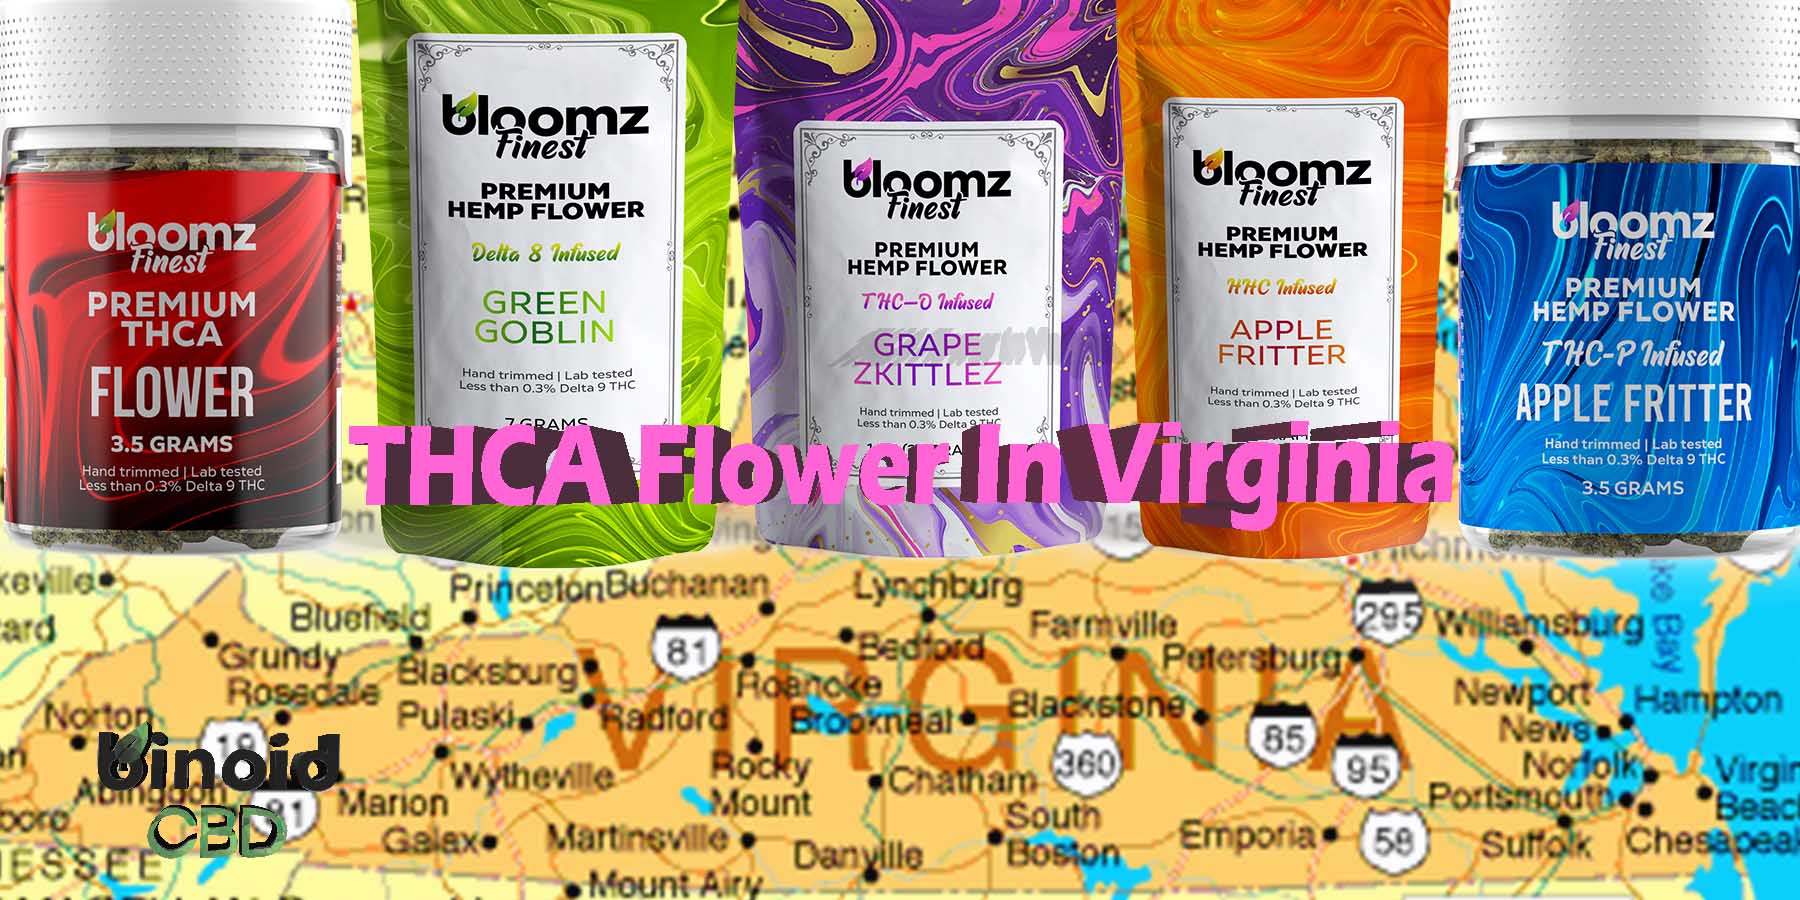 THCA Flower In Virginia Delta 8 Flower In Pre Rolls Where To Get Near Me Best Place Lowest Price Coupon Discount Strongest Brand Bloomz